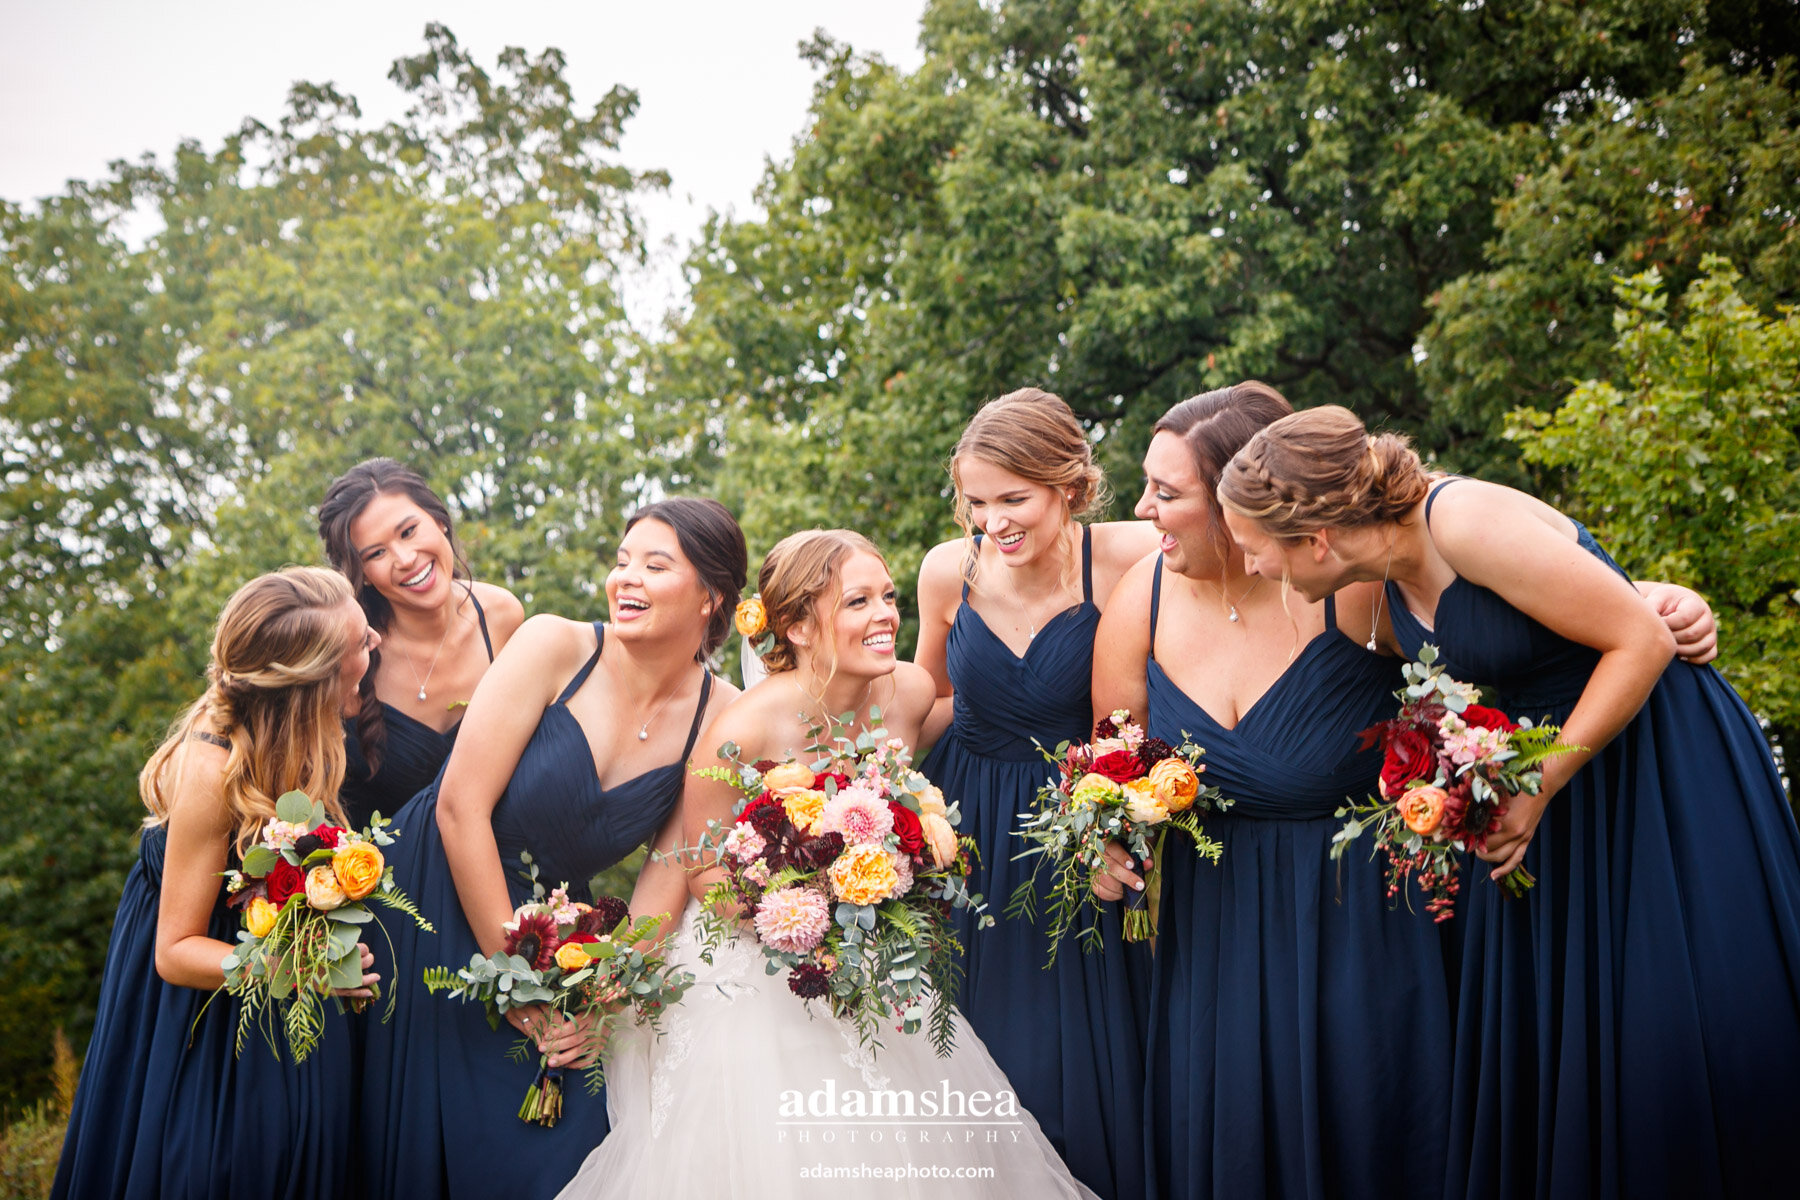 Gorgeous Wedding Fields at the Reserve - Stoughton WI - Adam Shea Photography - Bridesmaids